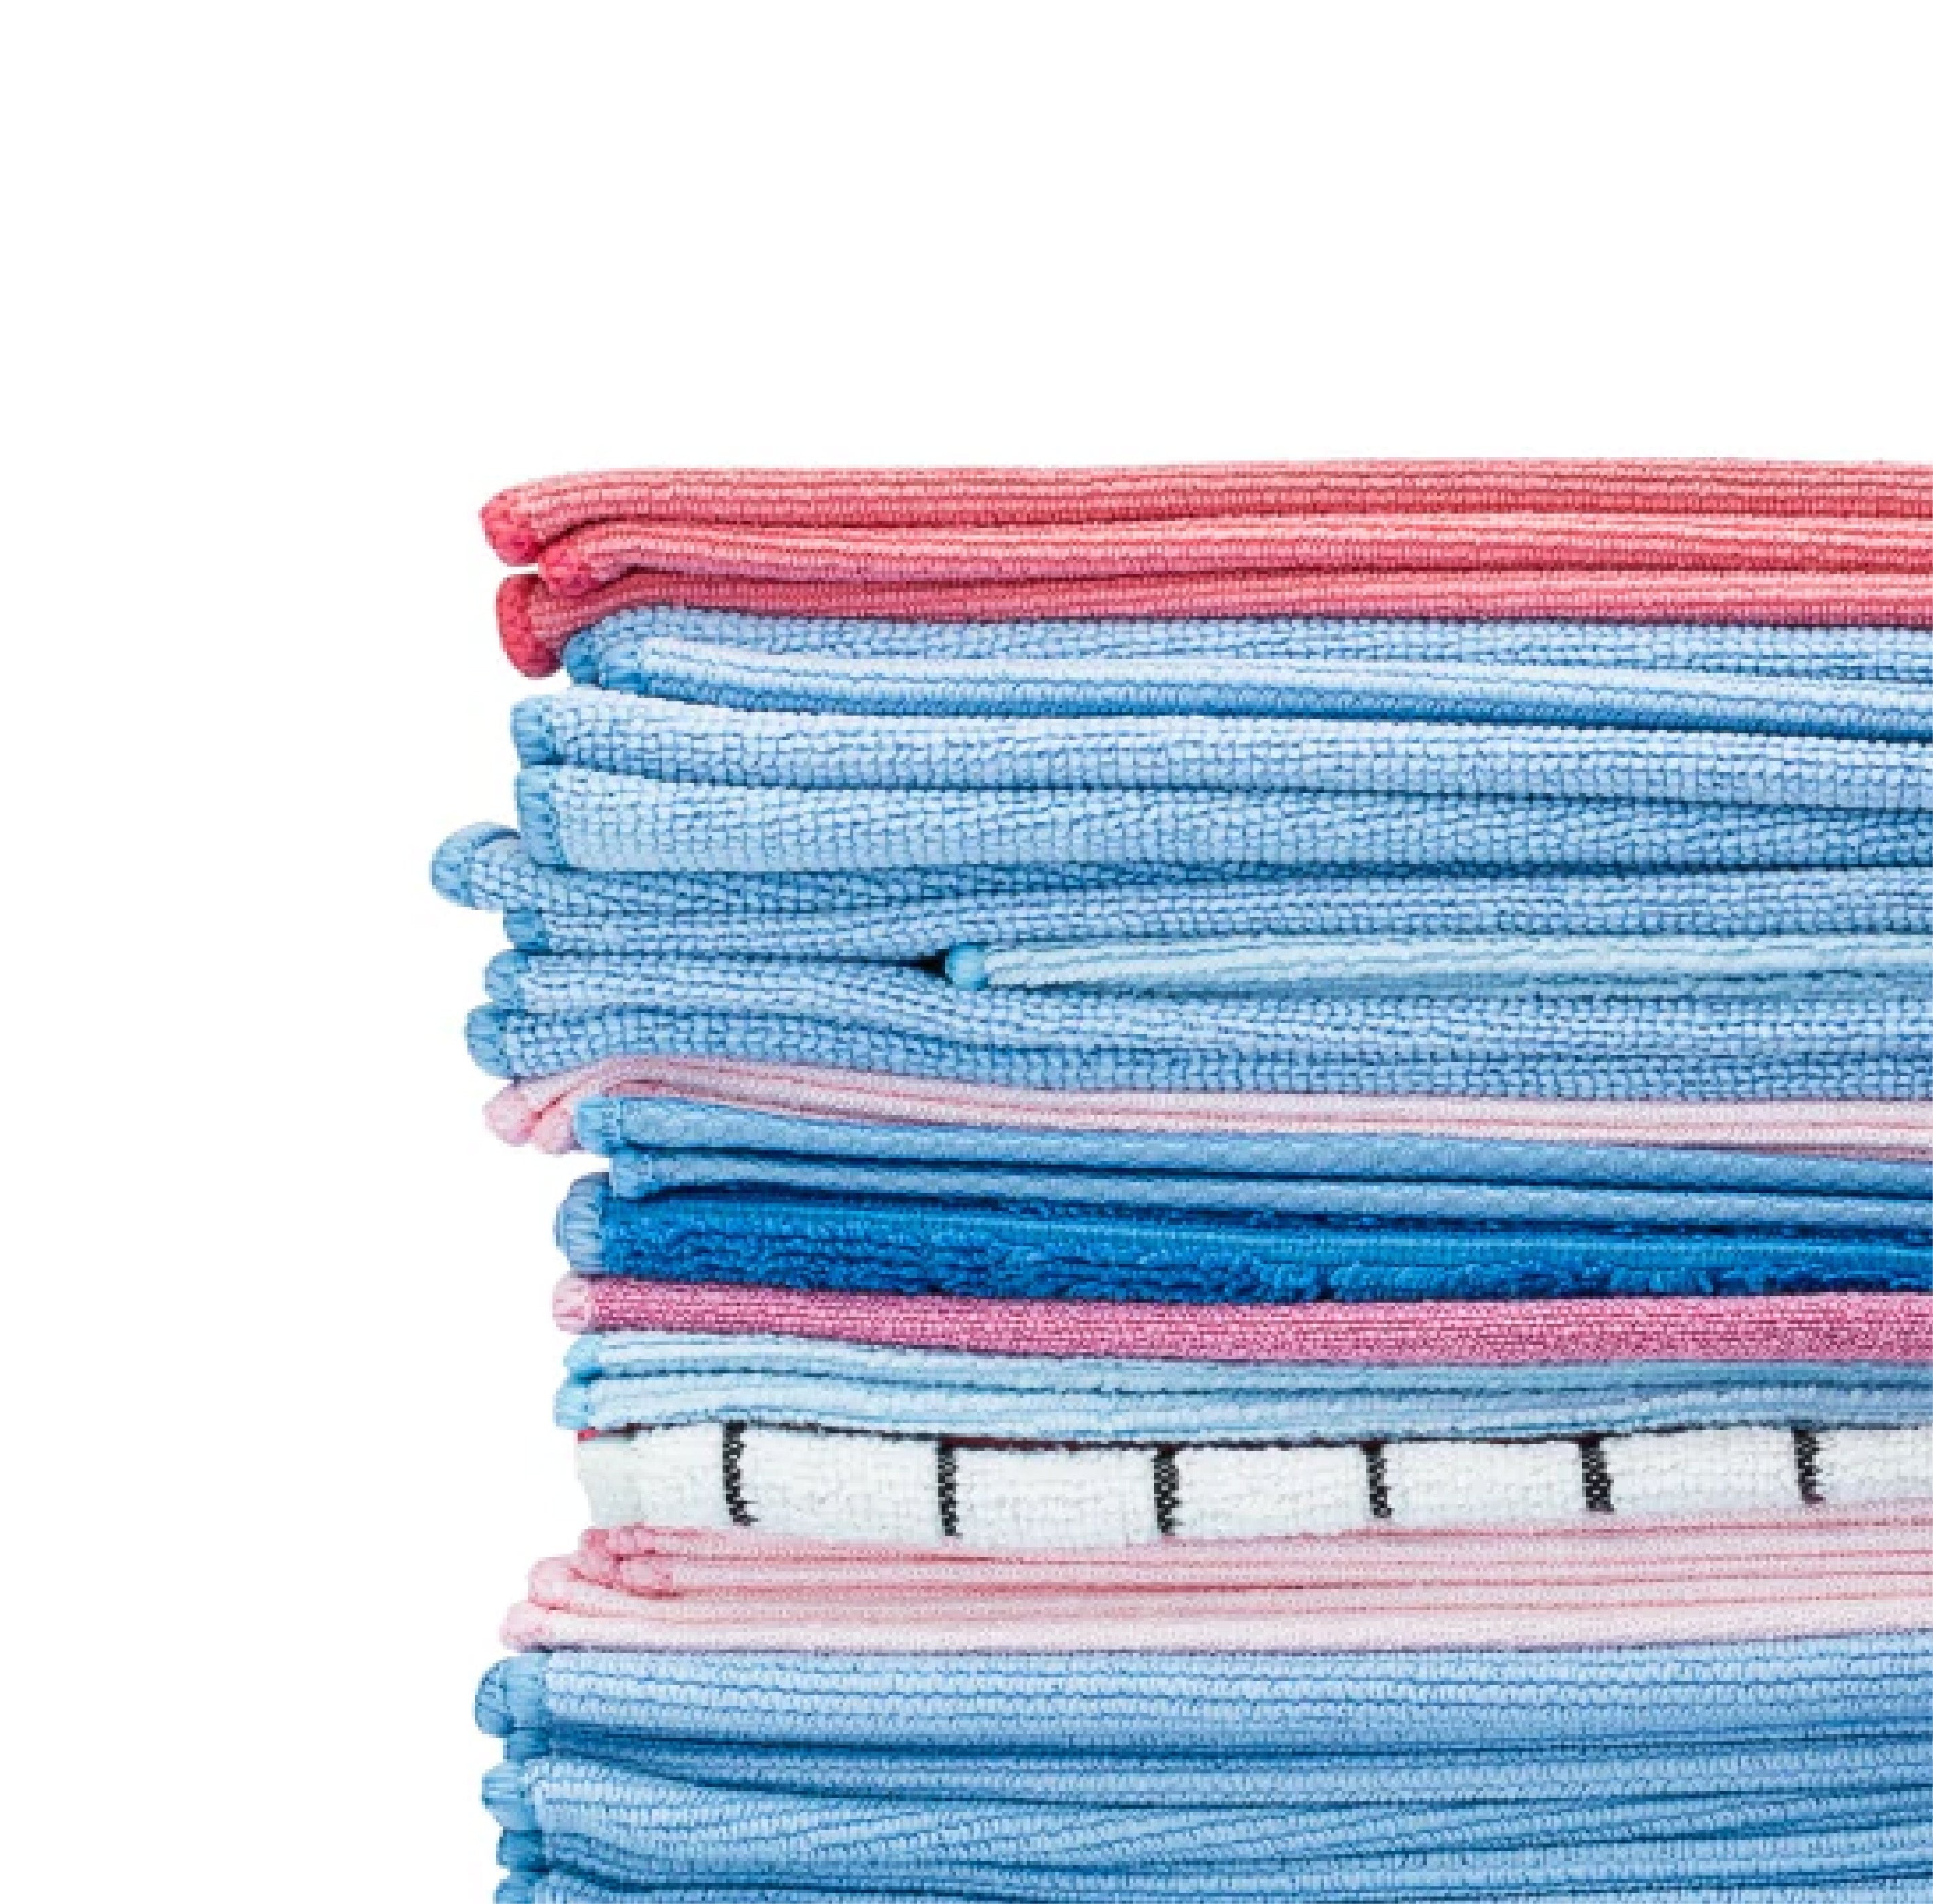 Purchase Cleaning Rags In Bulk - Indetexx